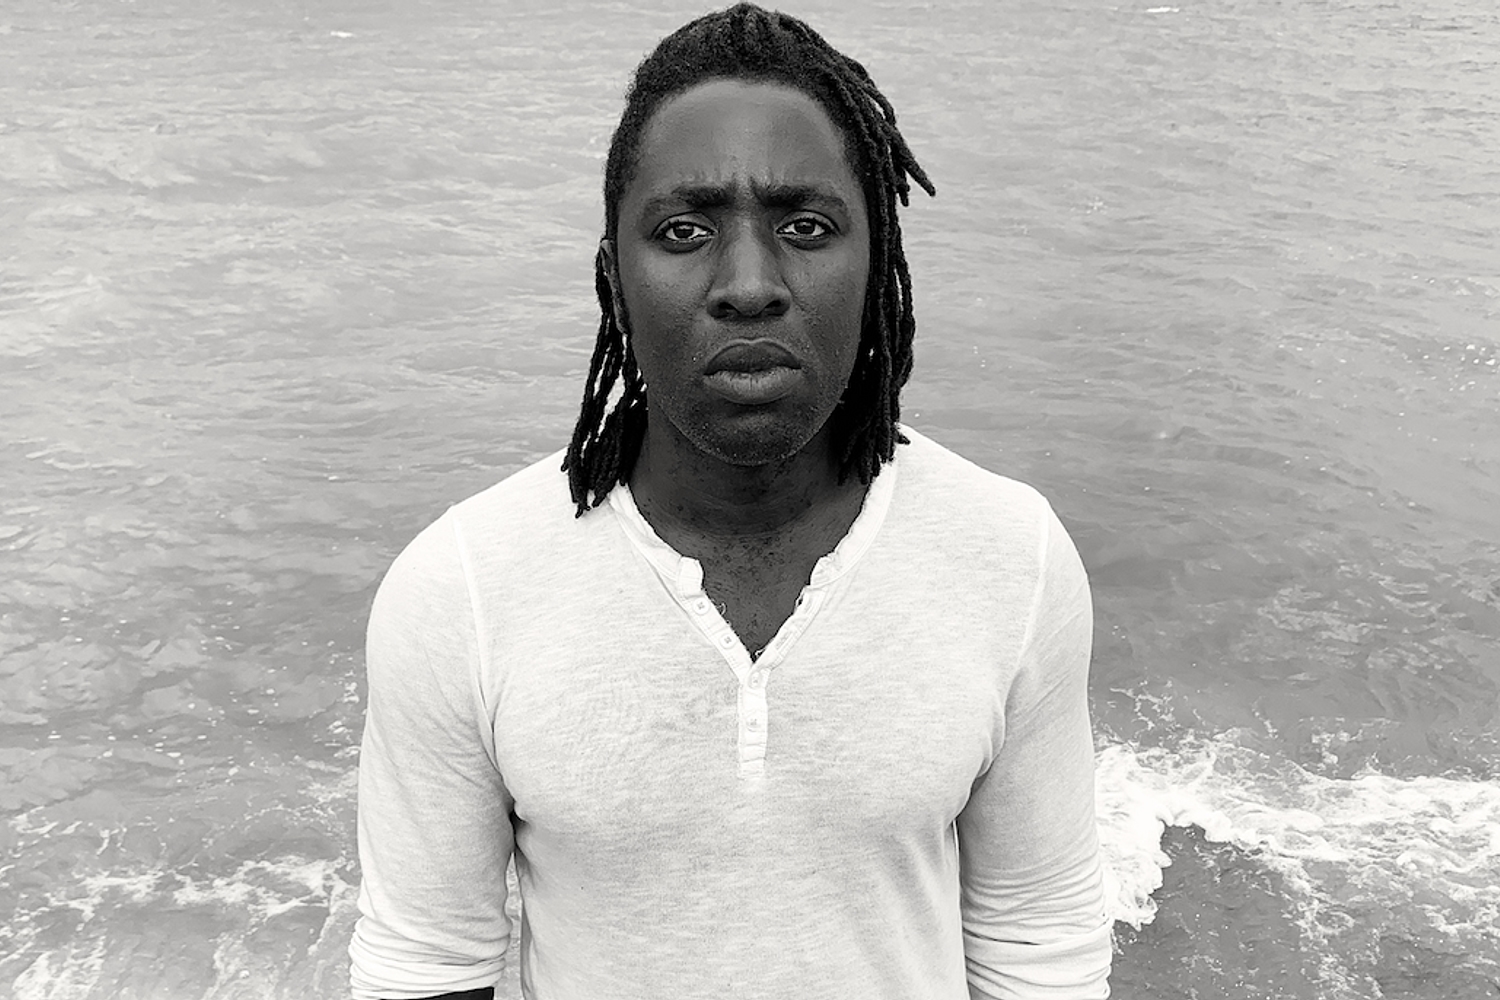 Kele shares new song ‘From A Place Of Love’